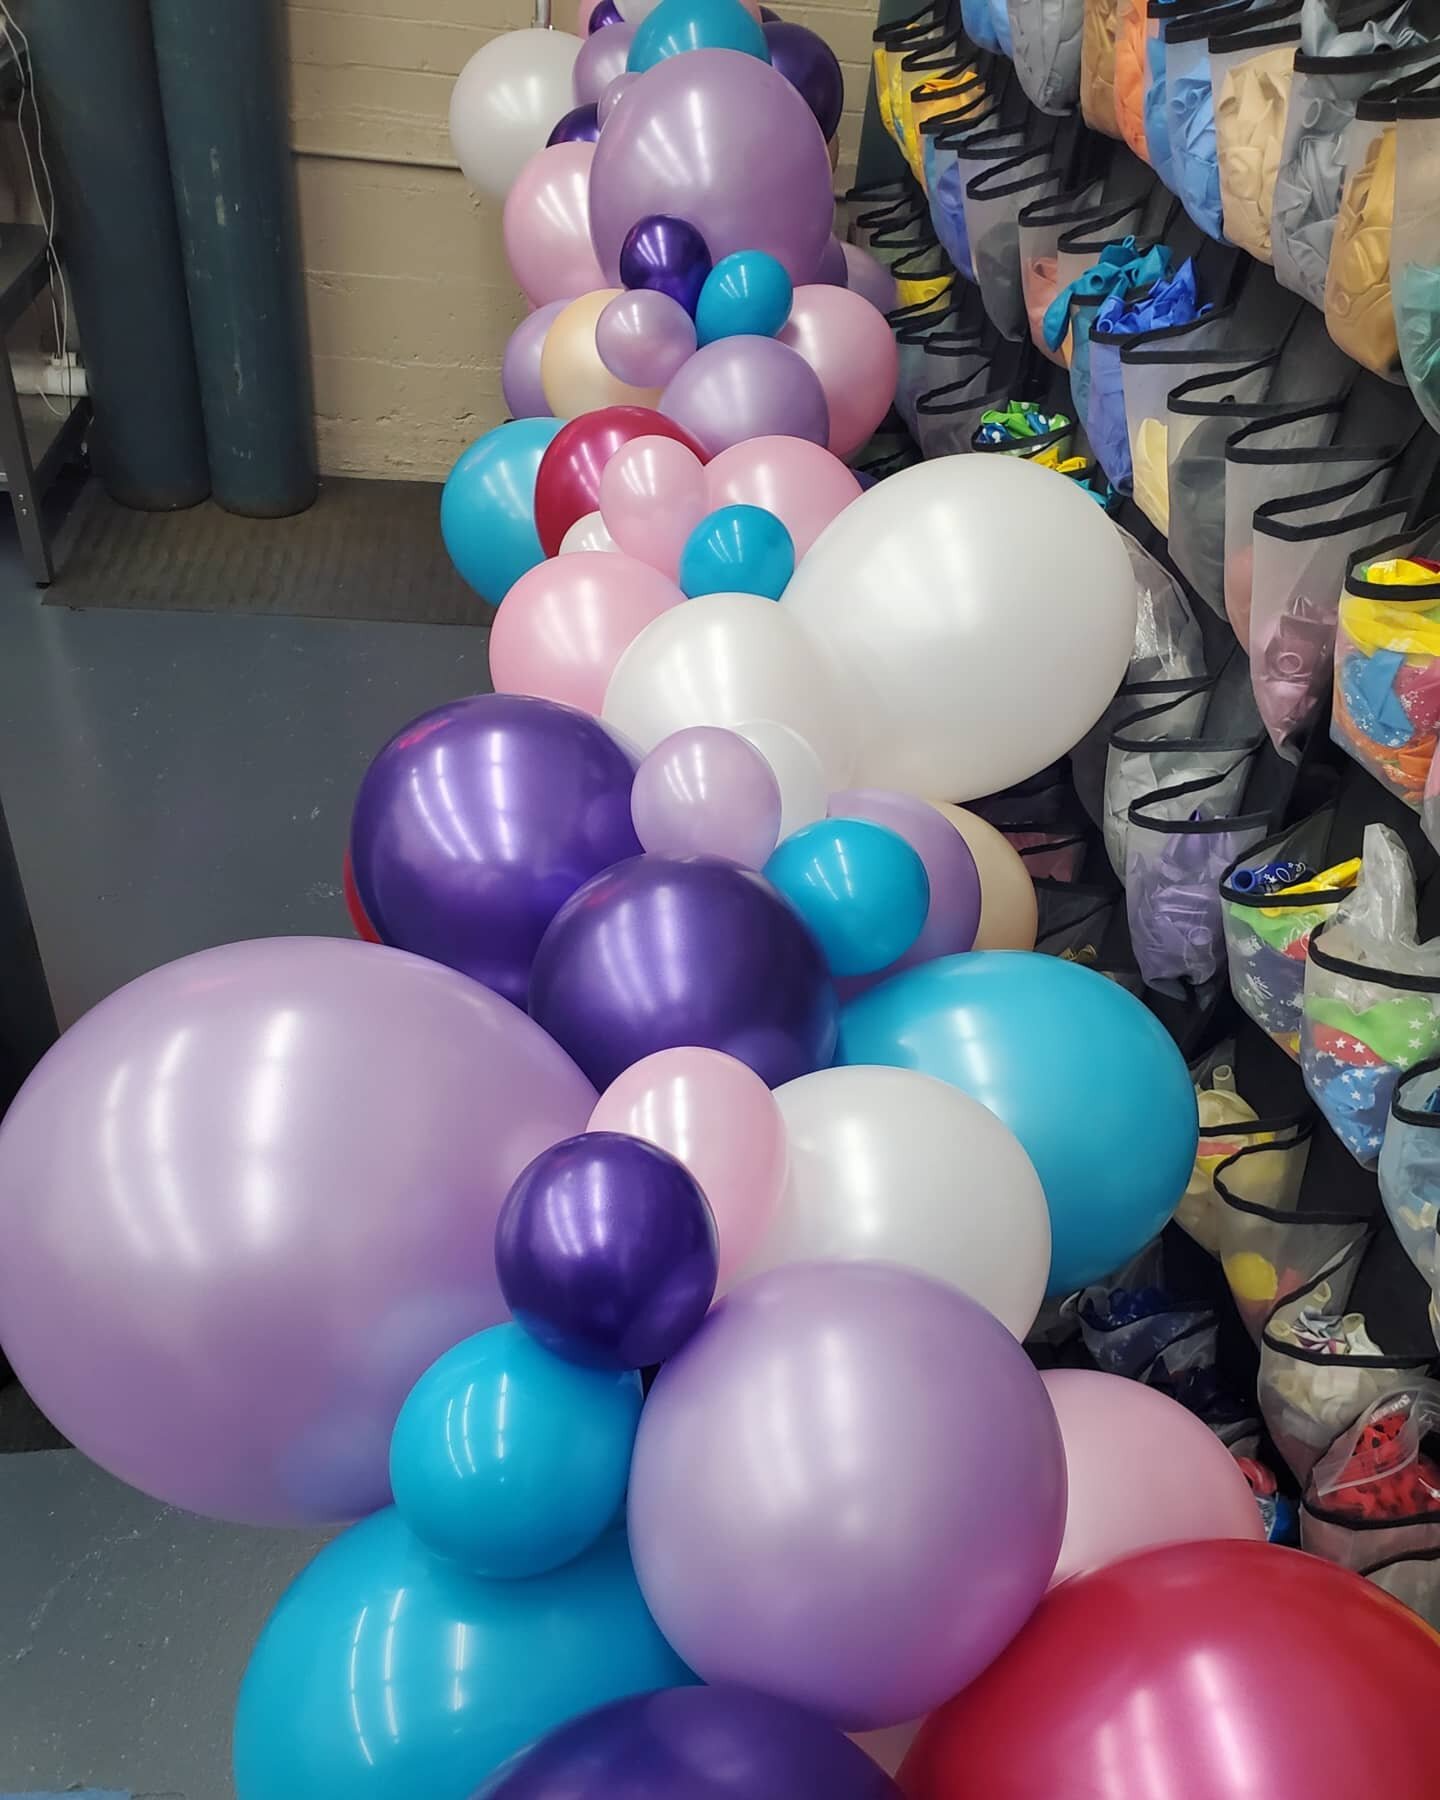 Some interesting color palettes straight from our production line!
❤🧡💛💚💙💜
What do you think?

#balloons #balloonsonbroadway #balloonsportland #balloonspdx #pdxballoons #portlandballoons #balloondecor #decor #creative #balloonsculpture #balloonfr